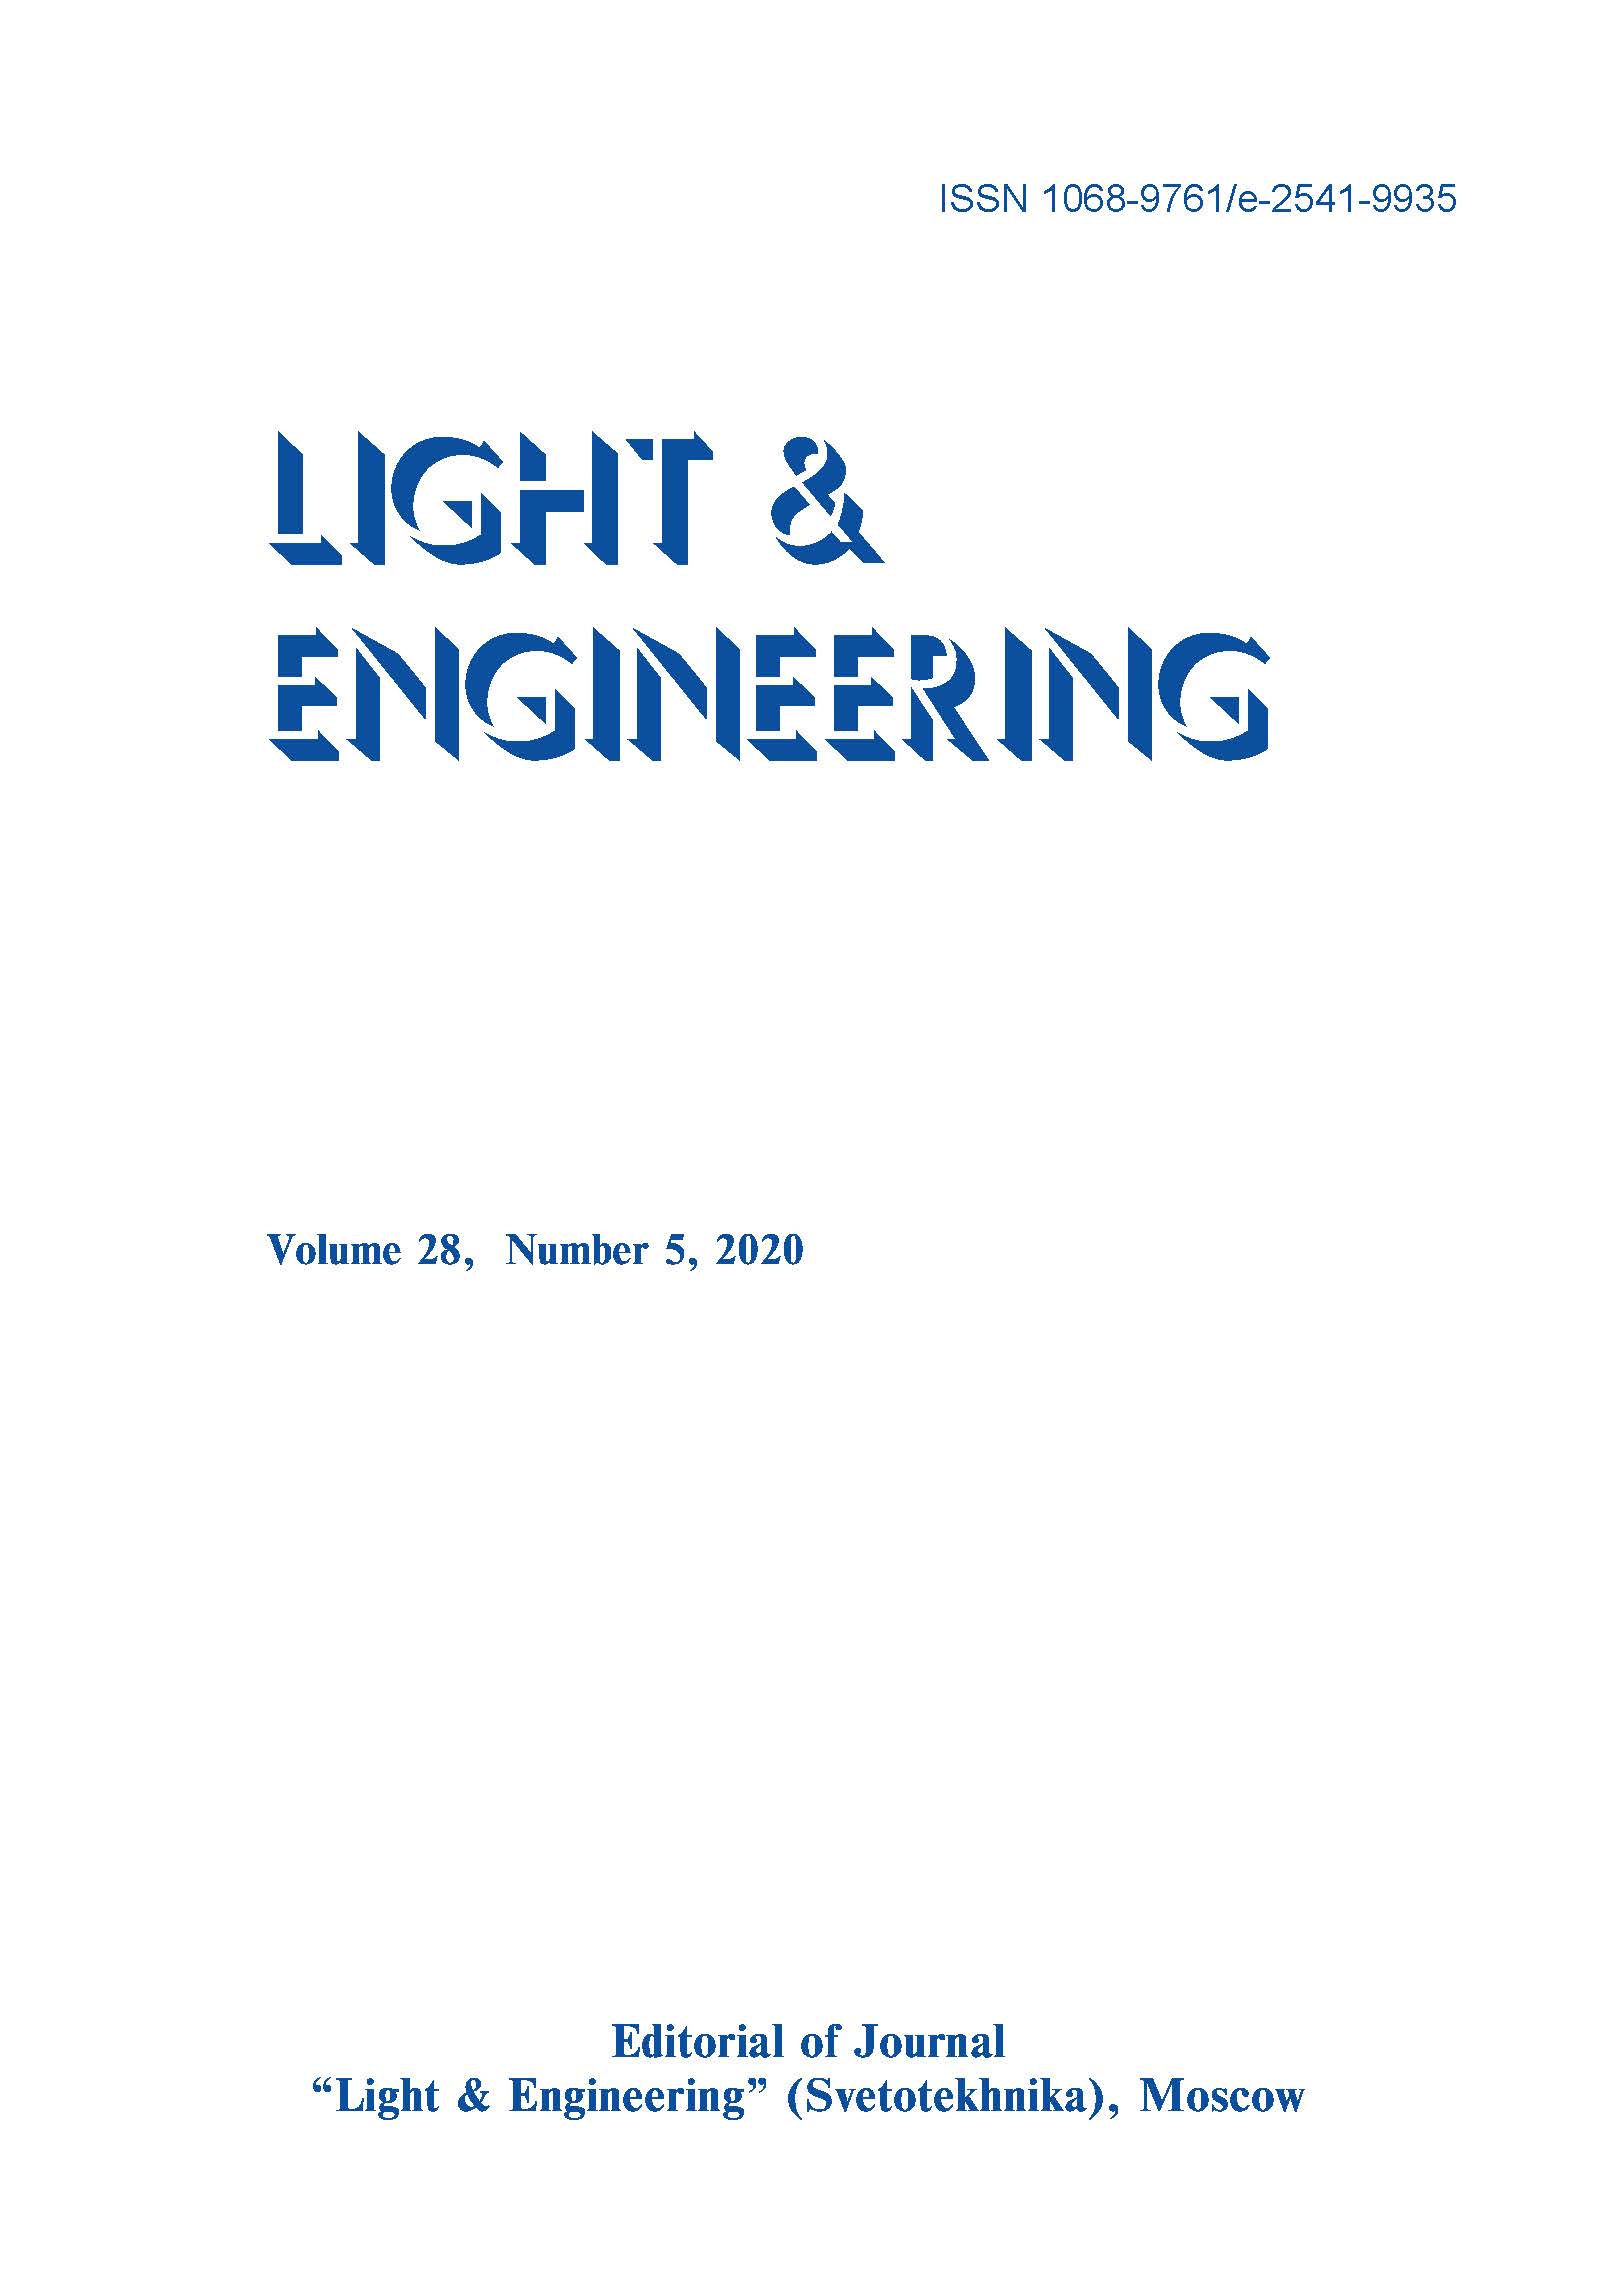 Present And Future Activities Of The International Commission On Illumination (cie) Light & Engineering Vol. 28, No. 5